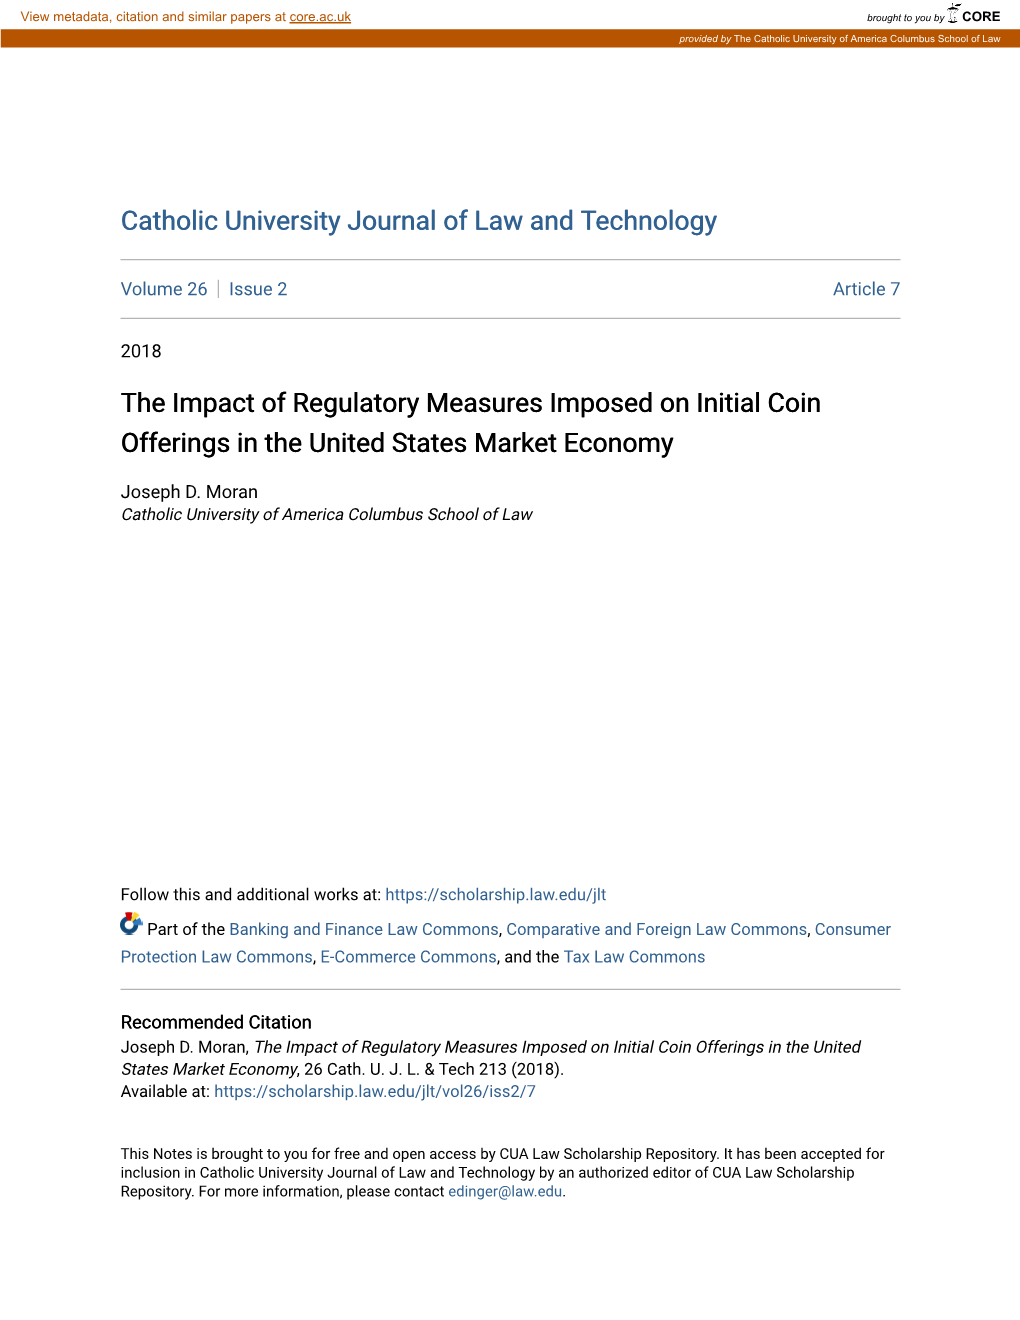 The Impact of Regulatory Measures Imposed on Initial Coin Offerings in the United States Market Economy